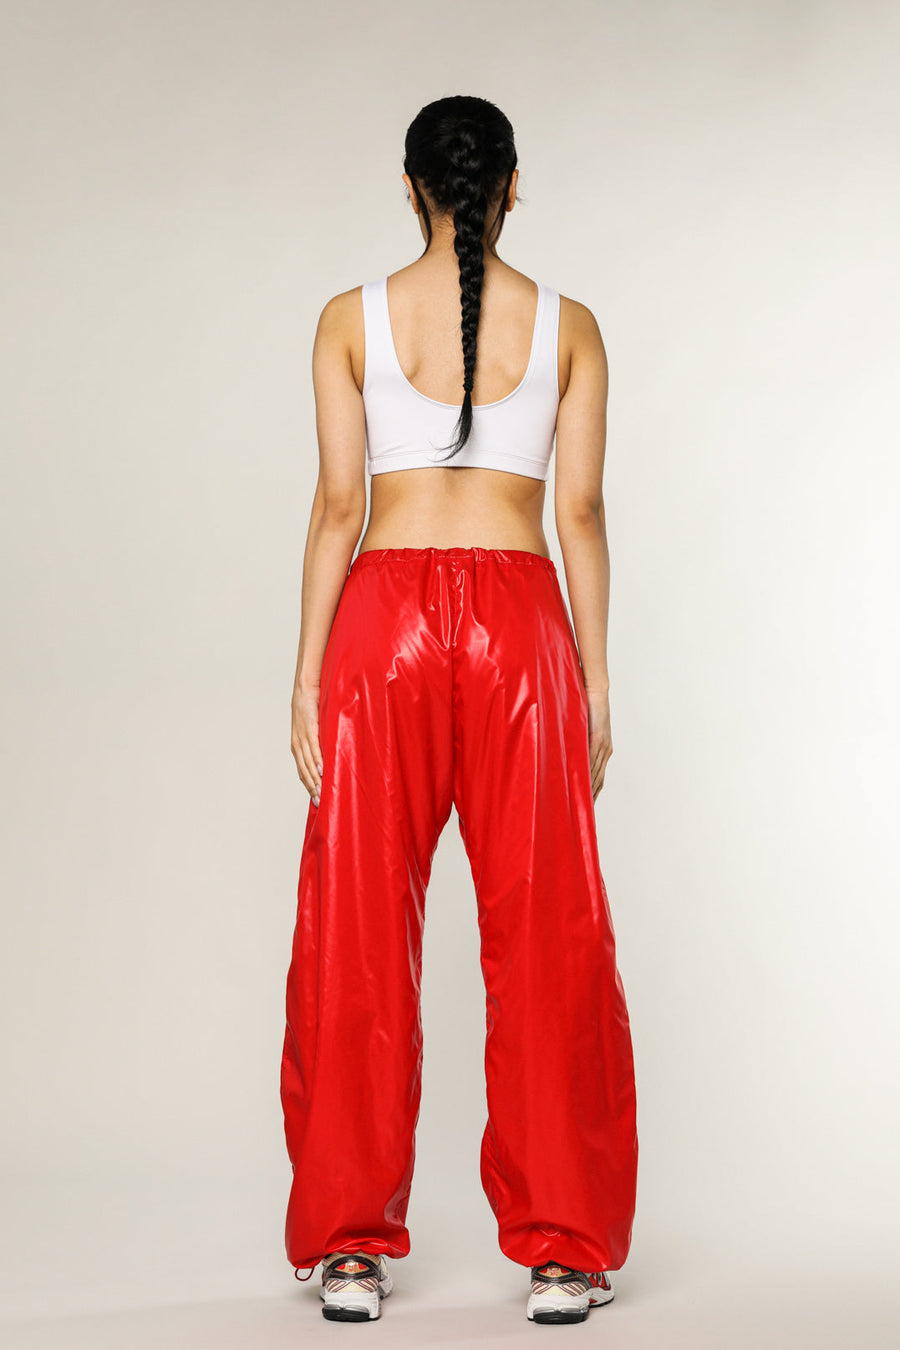 Deadstock Red Magma Pant - XS, S, M, L, XL, 2XL